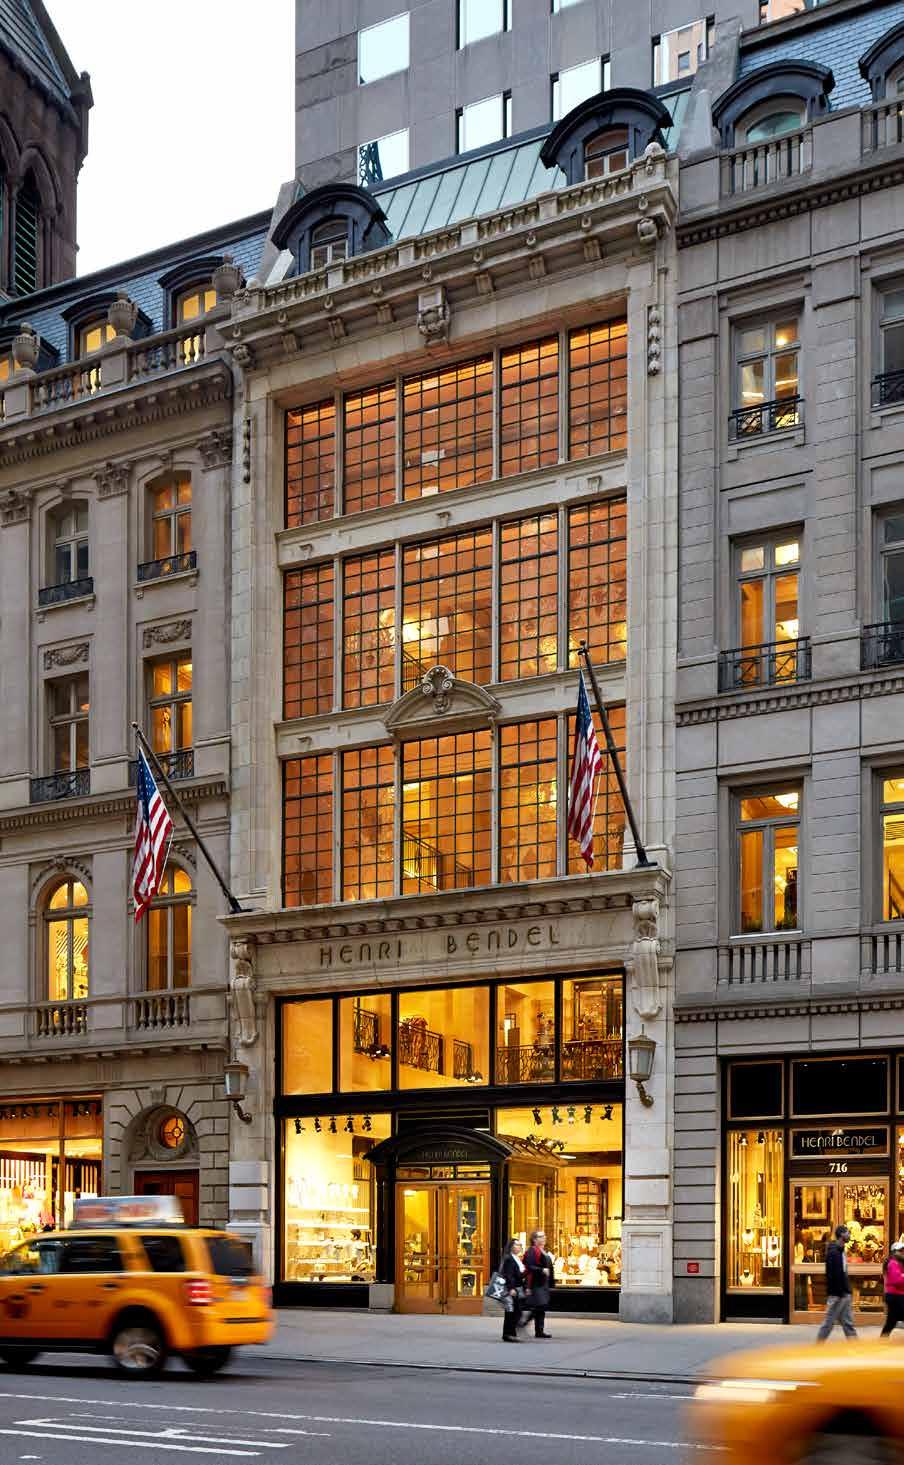 Each boutique is separated from the atrium space by traditional steel and glass storefronts.